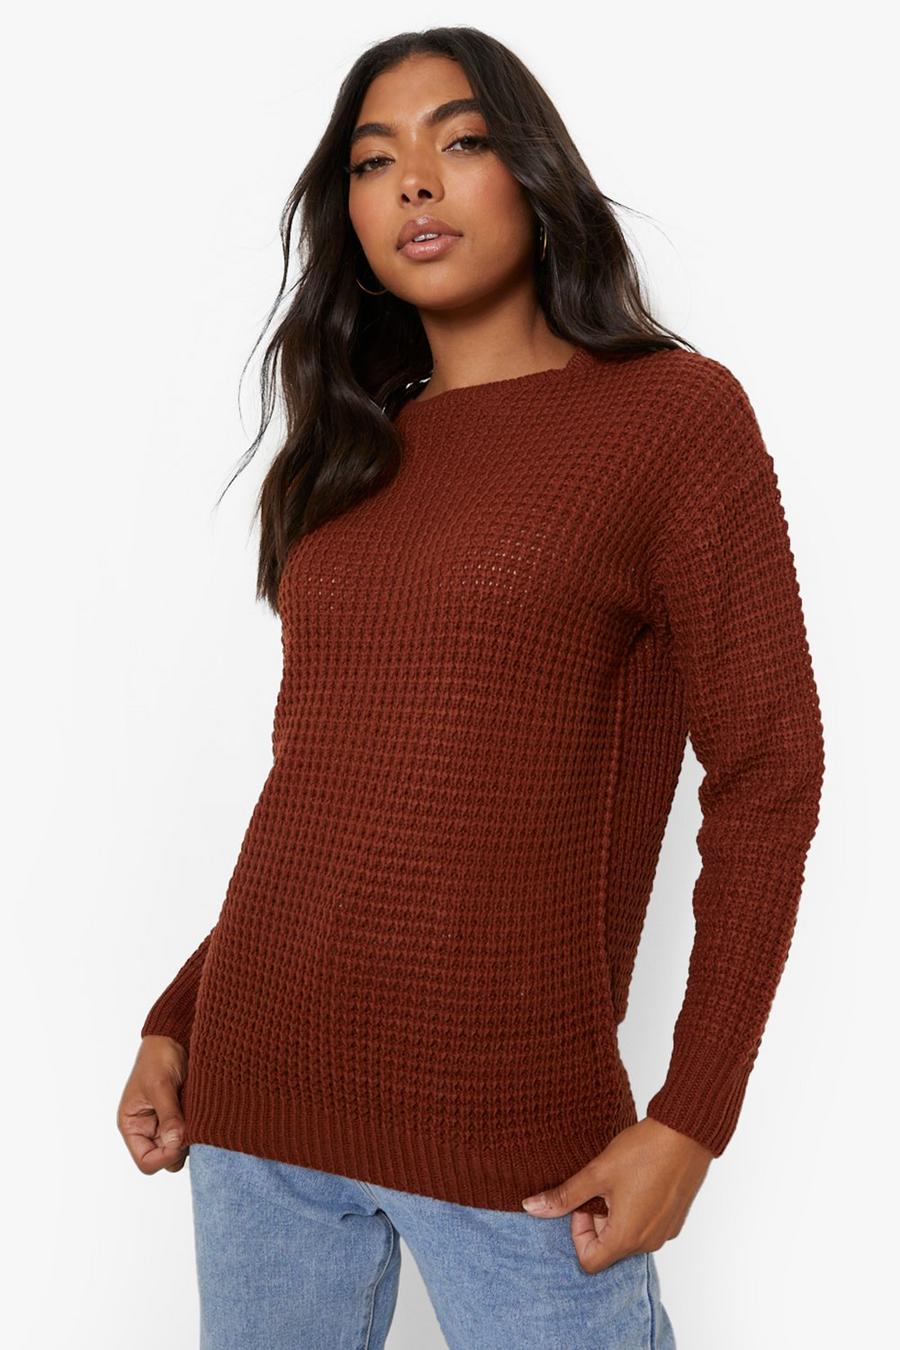 Mahogany brown Recycled Tall Basic Crew Neck Jumper